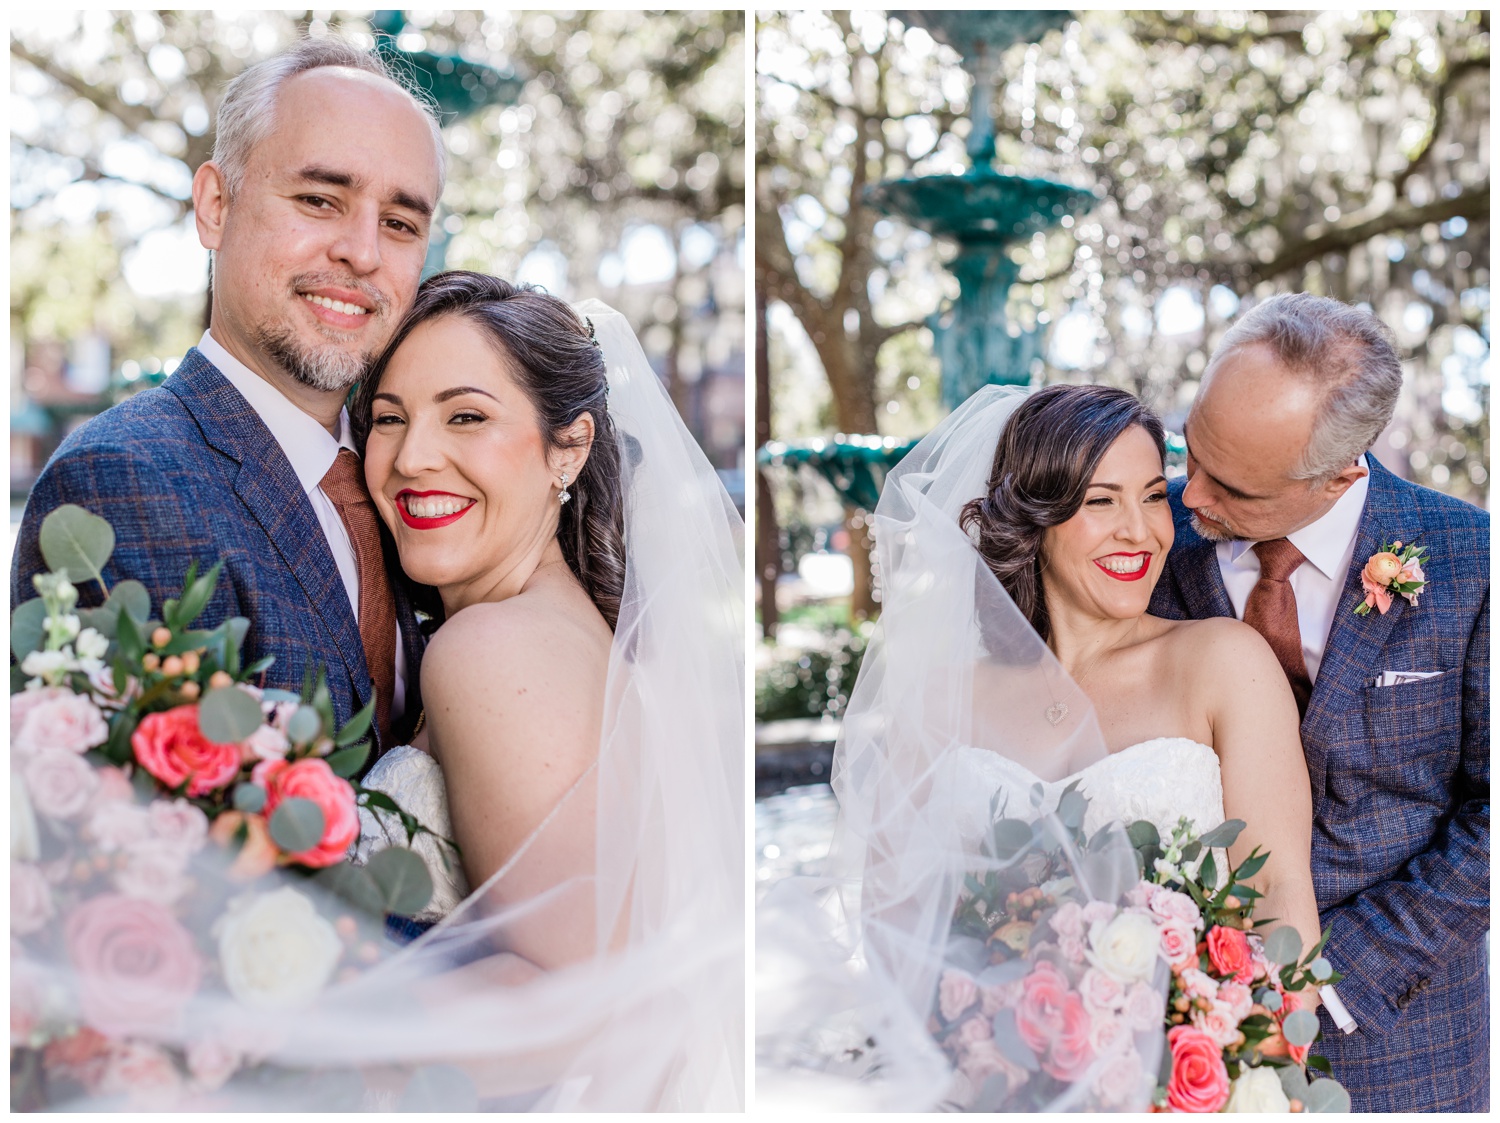 Couples photos - the savannah elopement package - flowers by ivory and beau